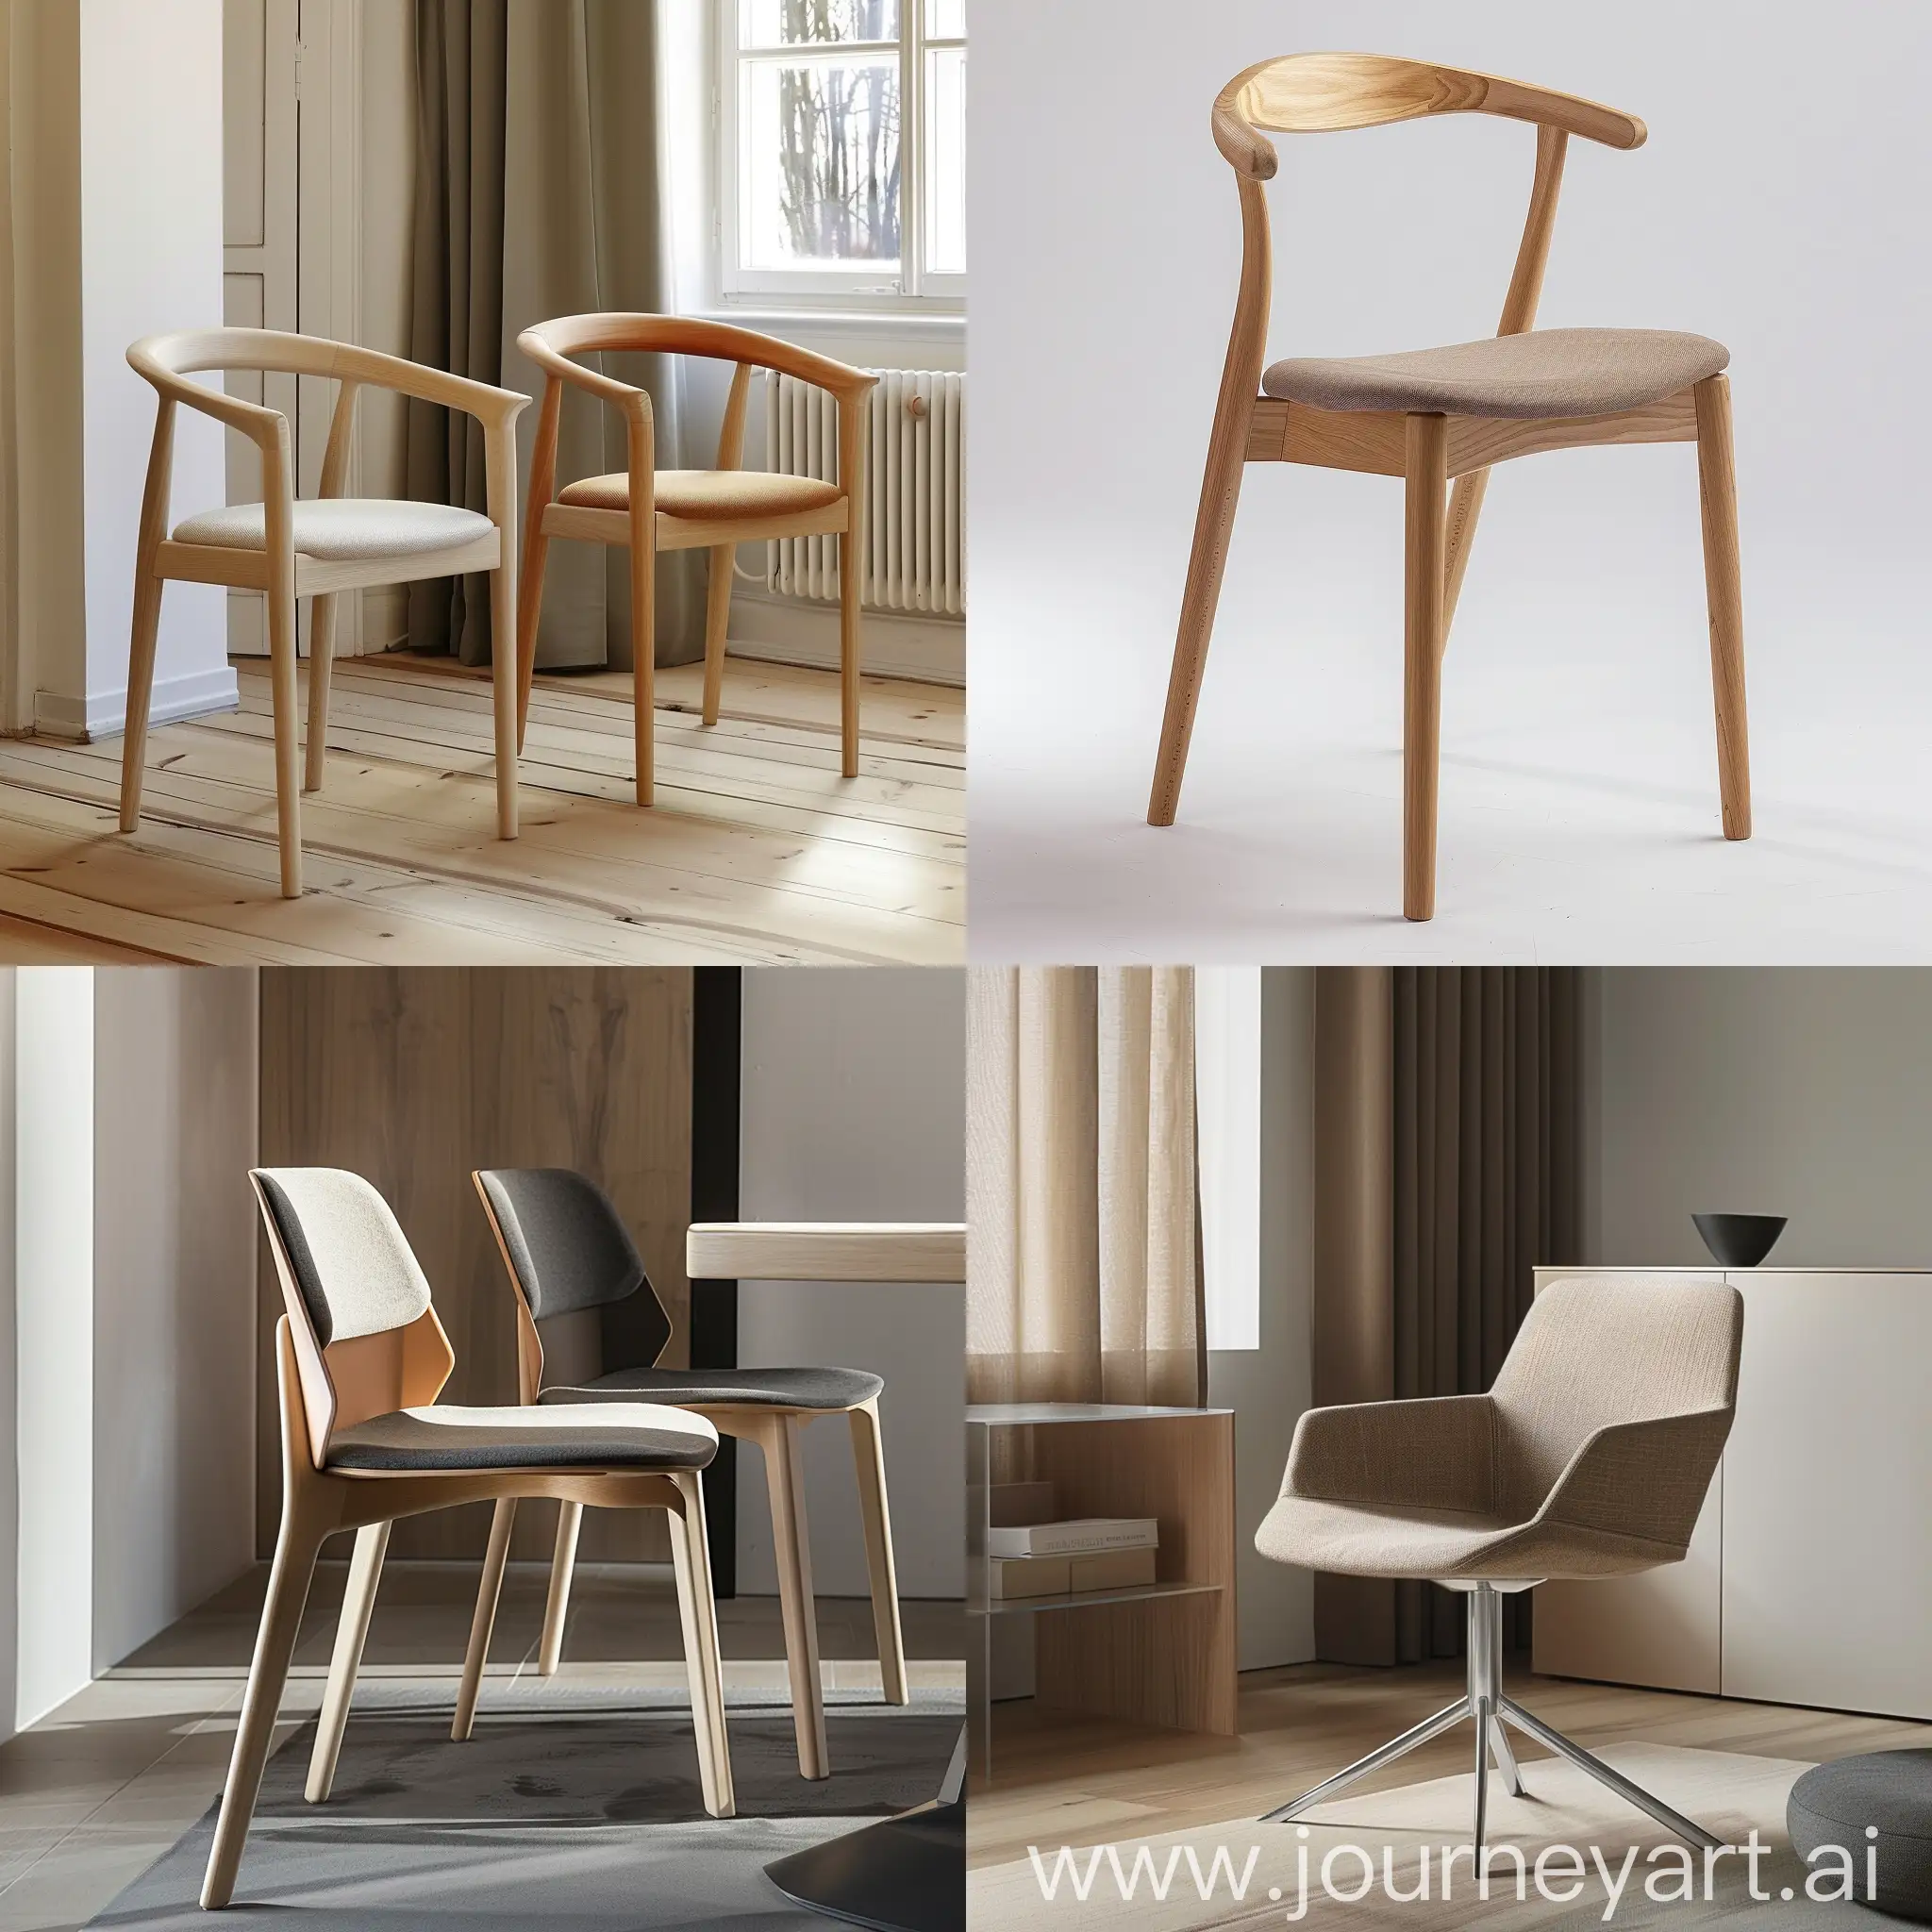 Compact-and-Durable-Lumbar-Support-Chair-with-Minimalist-Design